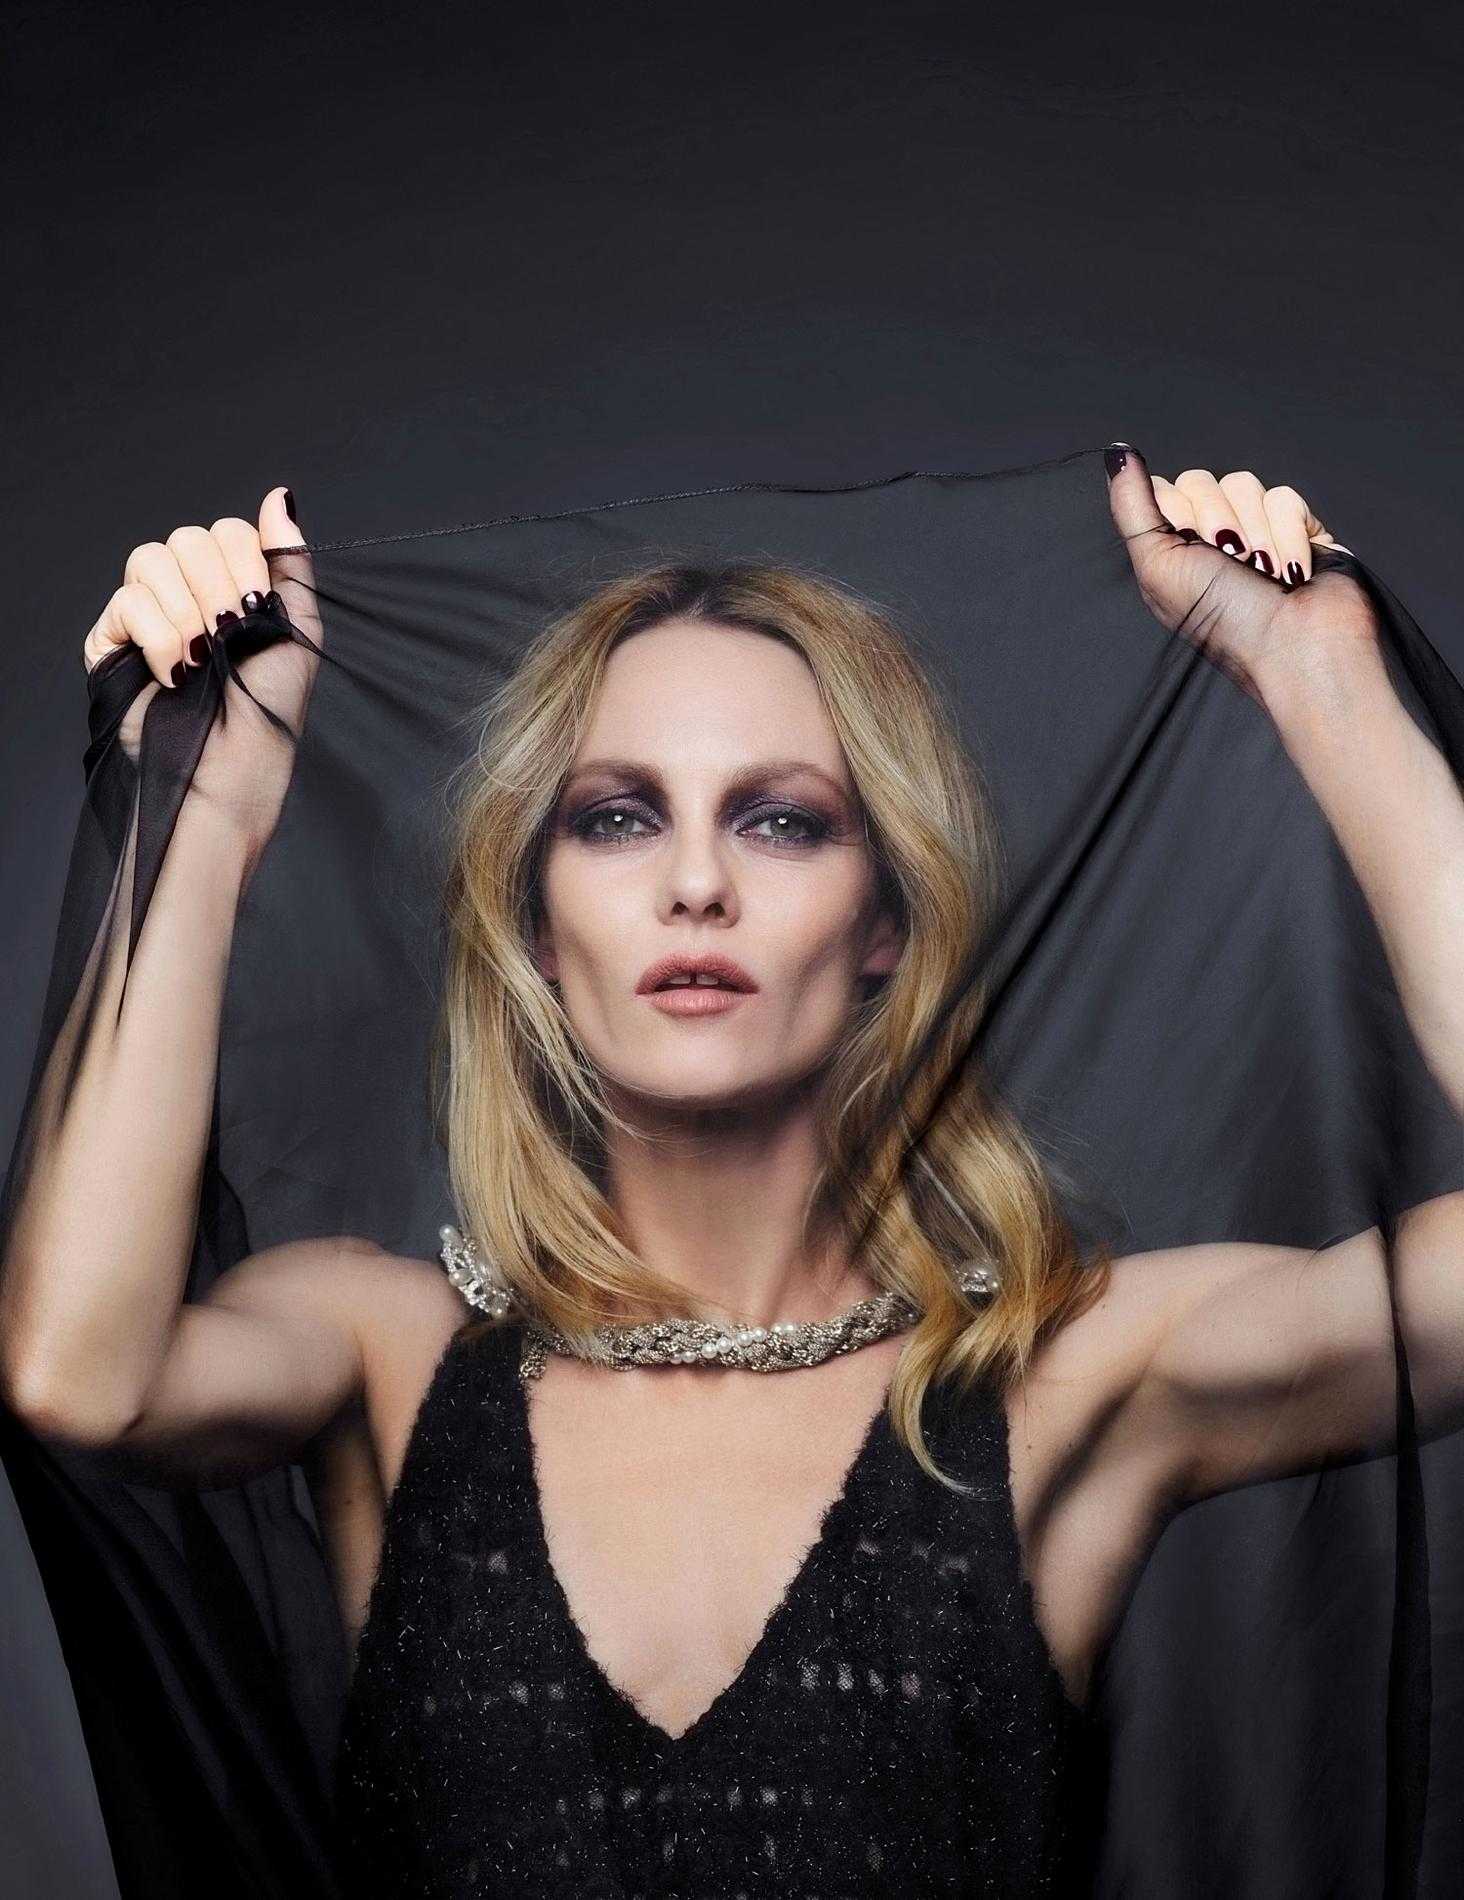 65+ Hot Pictures Of Vanessa Paradis Which Will Make Your Day | Best Of Comic Books